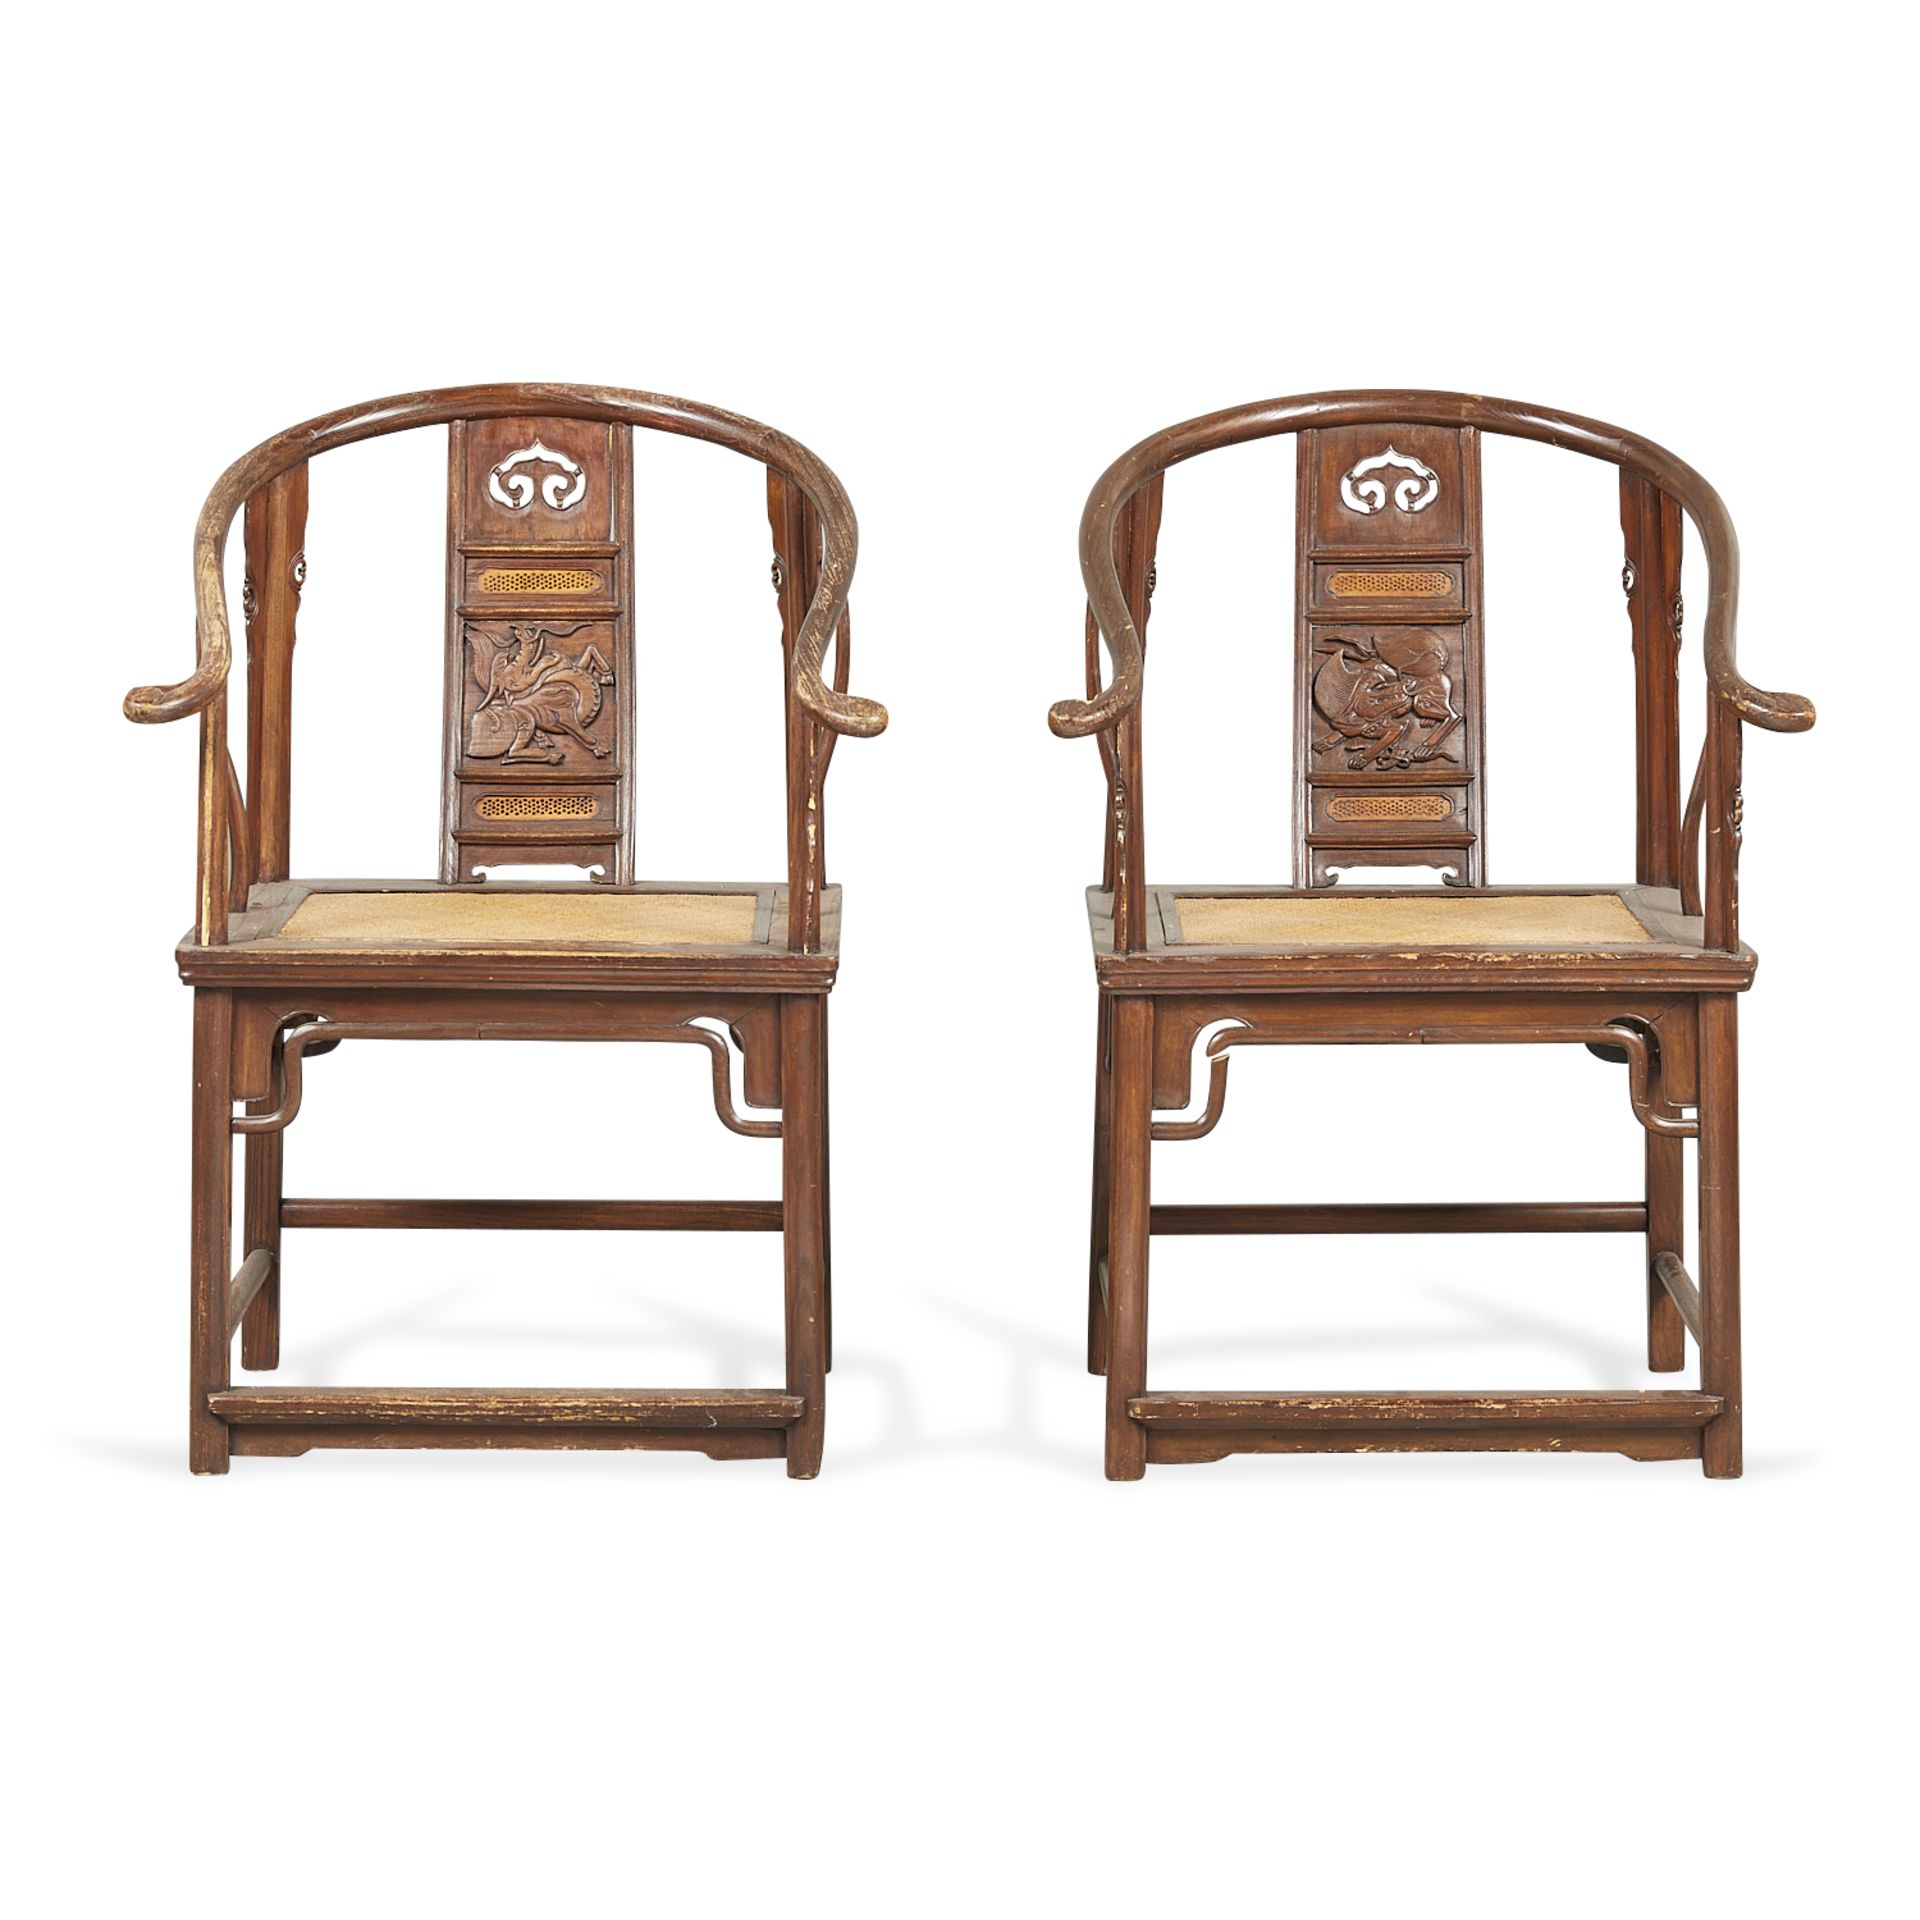 Pair Chinese Elm Horseshoe Back Quanyi Chairs - Image 3 of 20